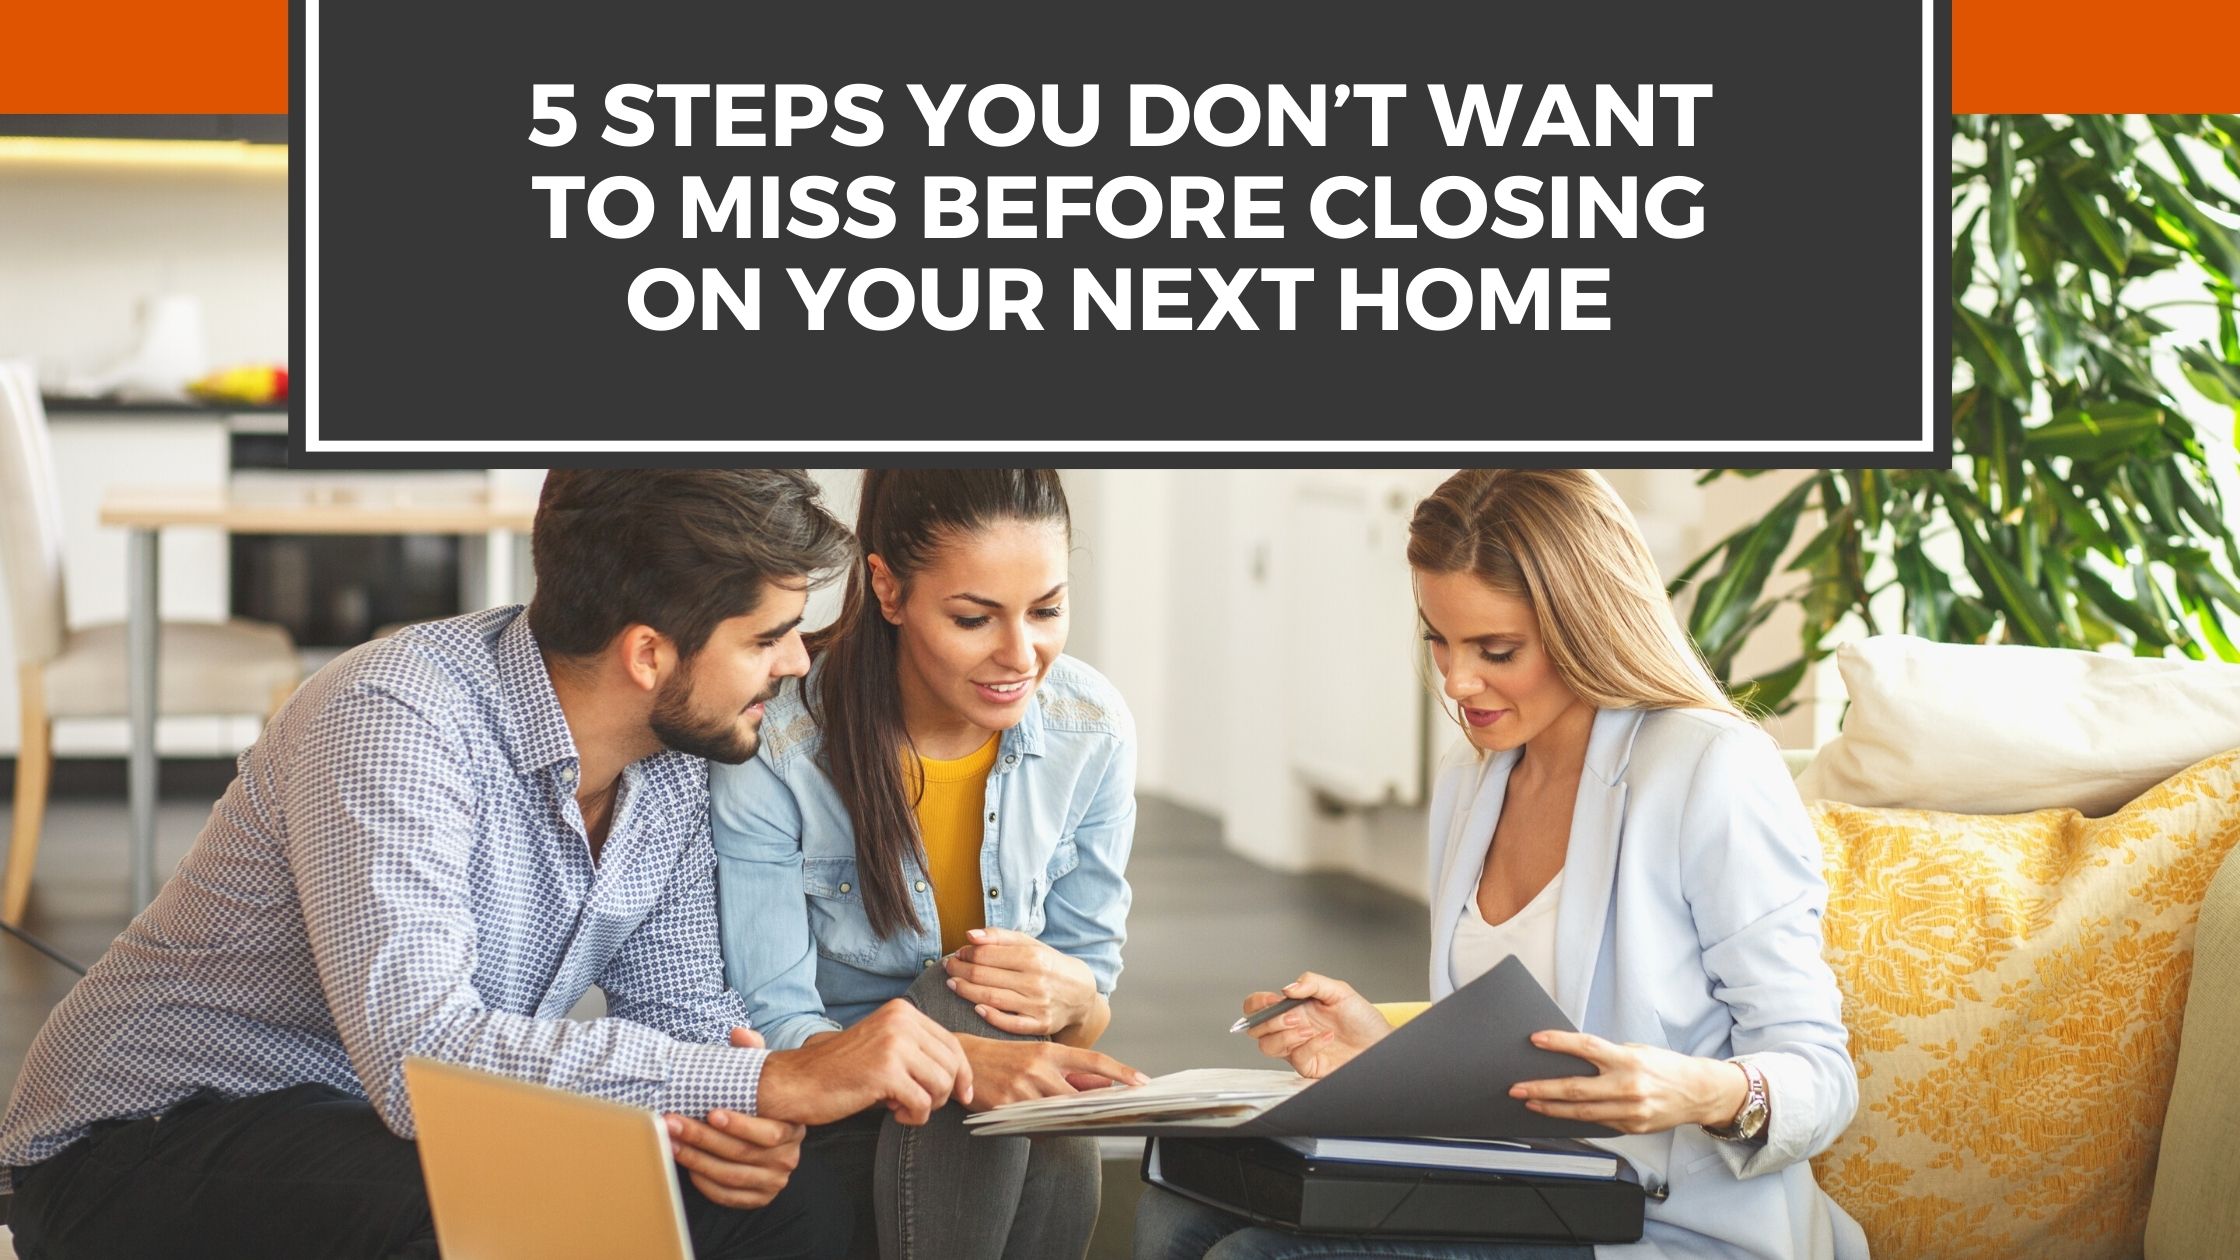 5 Steps You Don’t Want to Miss Before Closing on Your Next Home